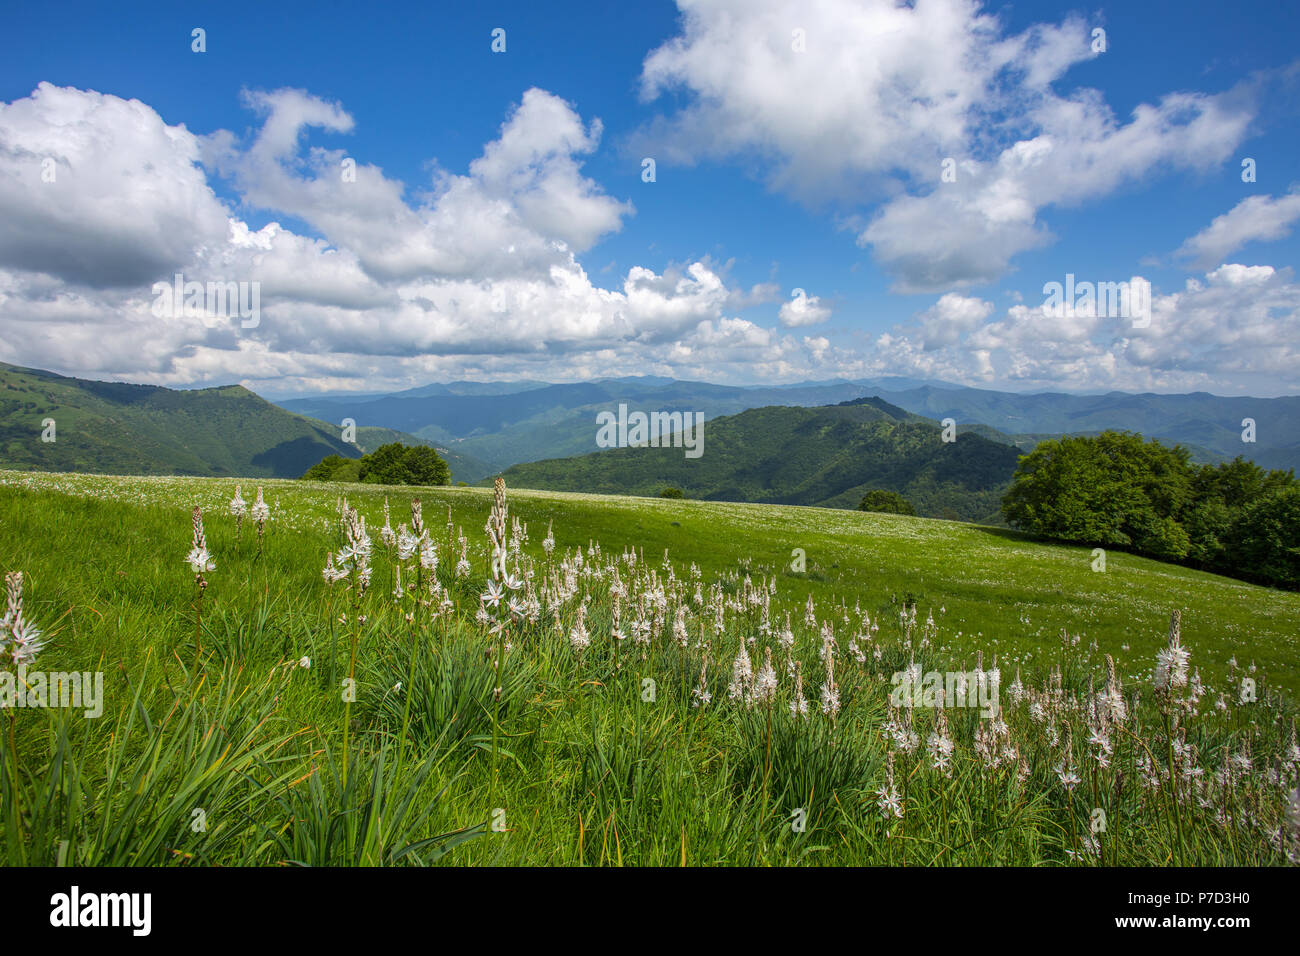 Meadow expanses with asphodels and narcissus flowers under a blue sky with clouds. Stock Photo